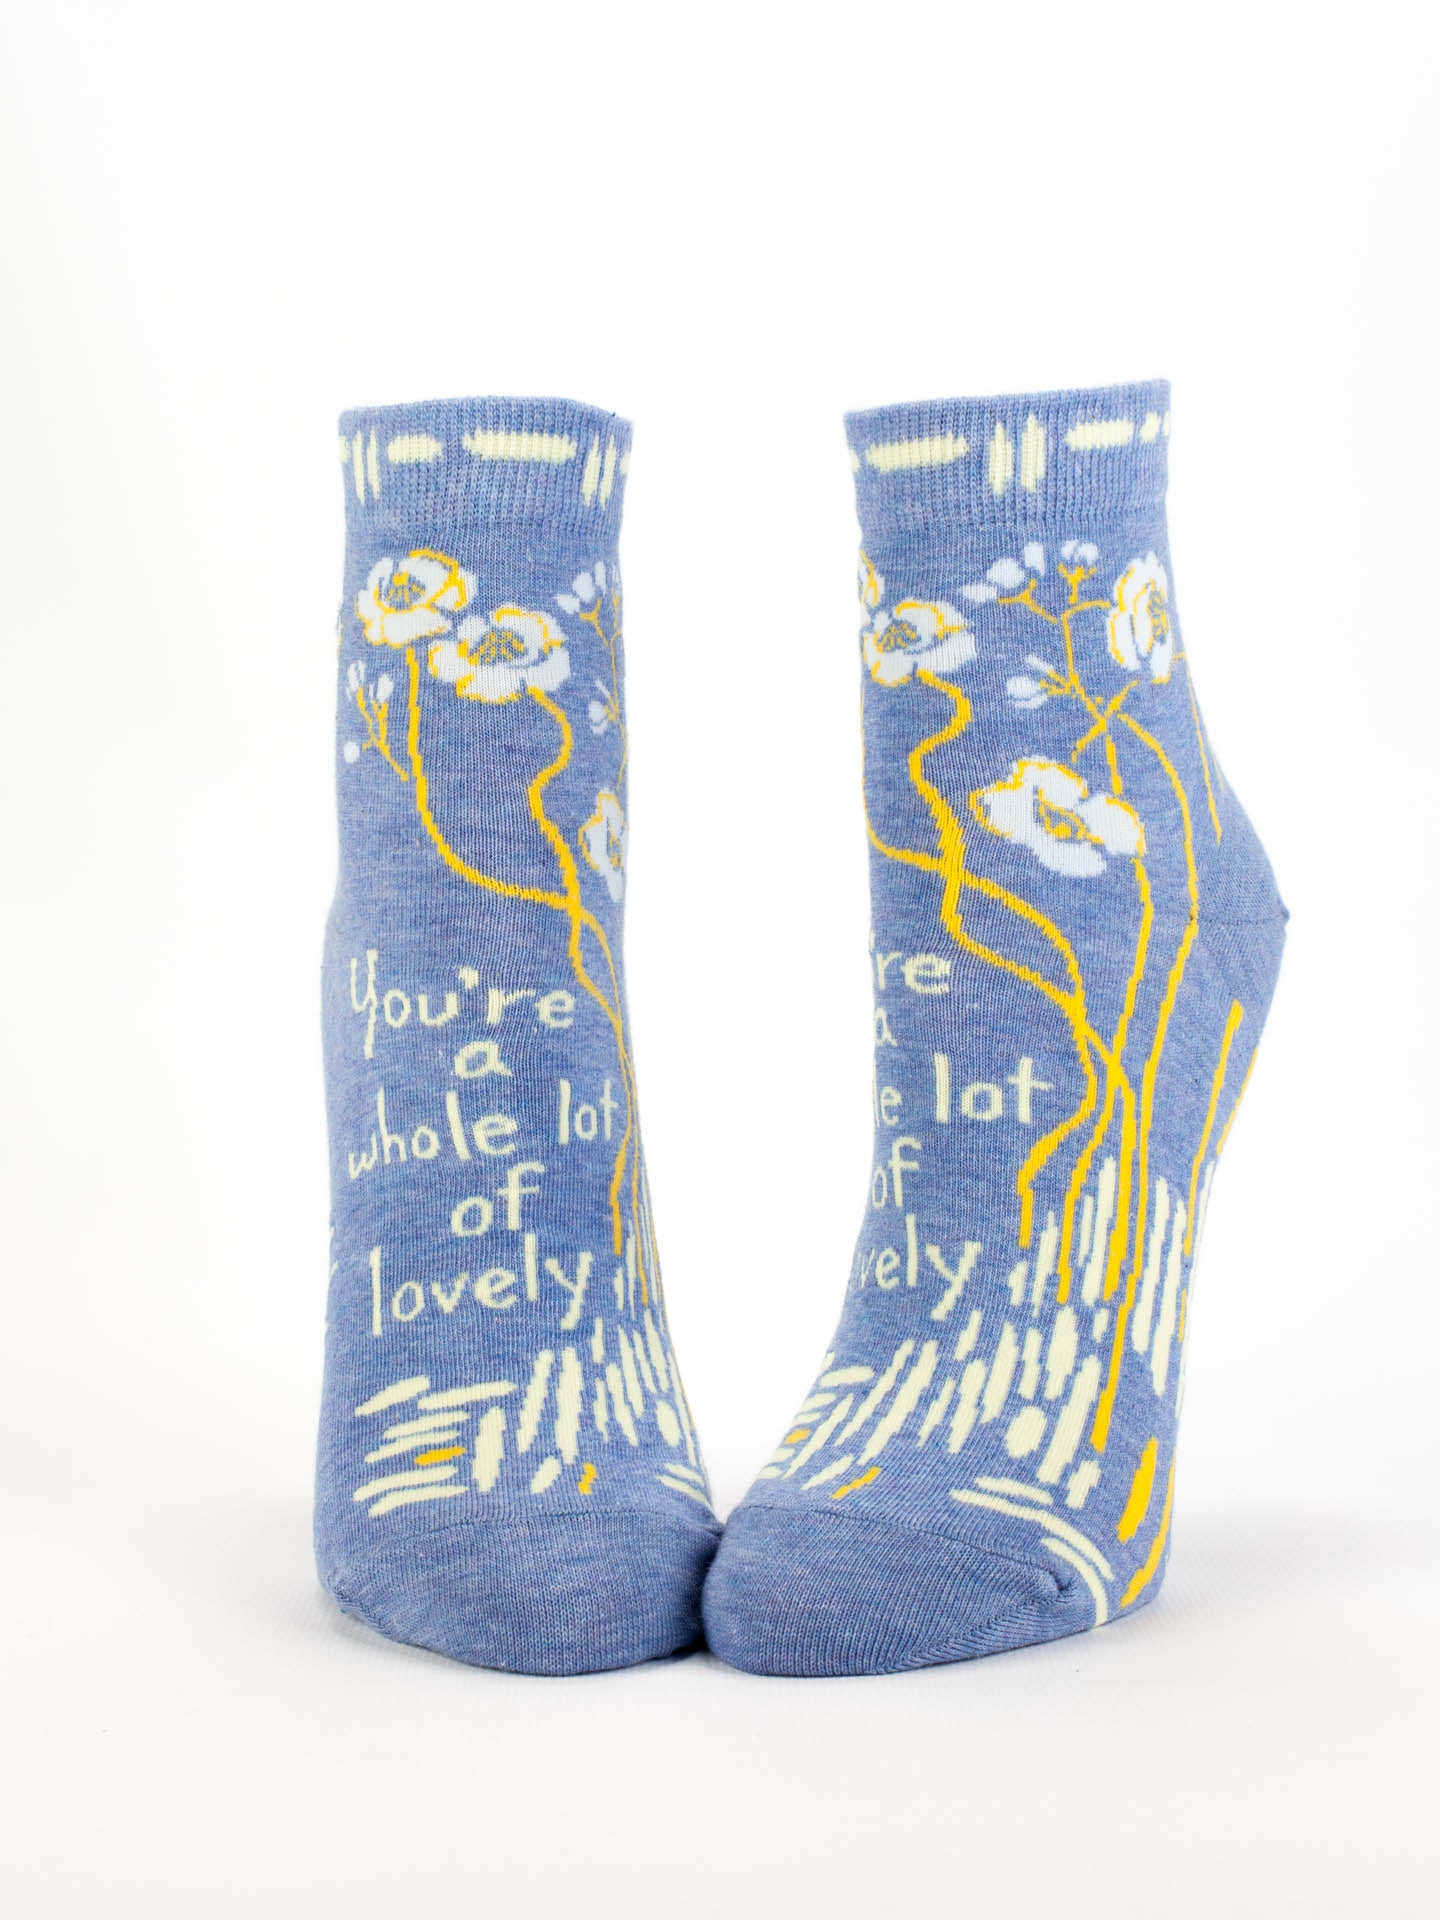 Blue Q Women's Ankle Socks - You're a Whole Lot of Lovely    